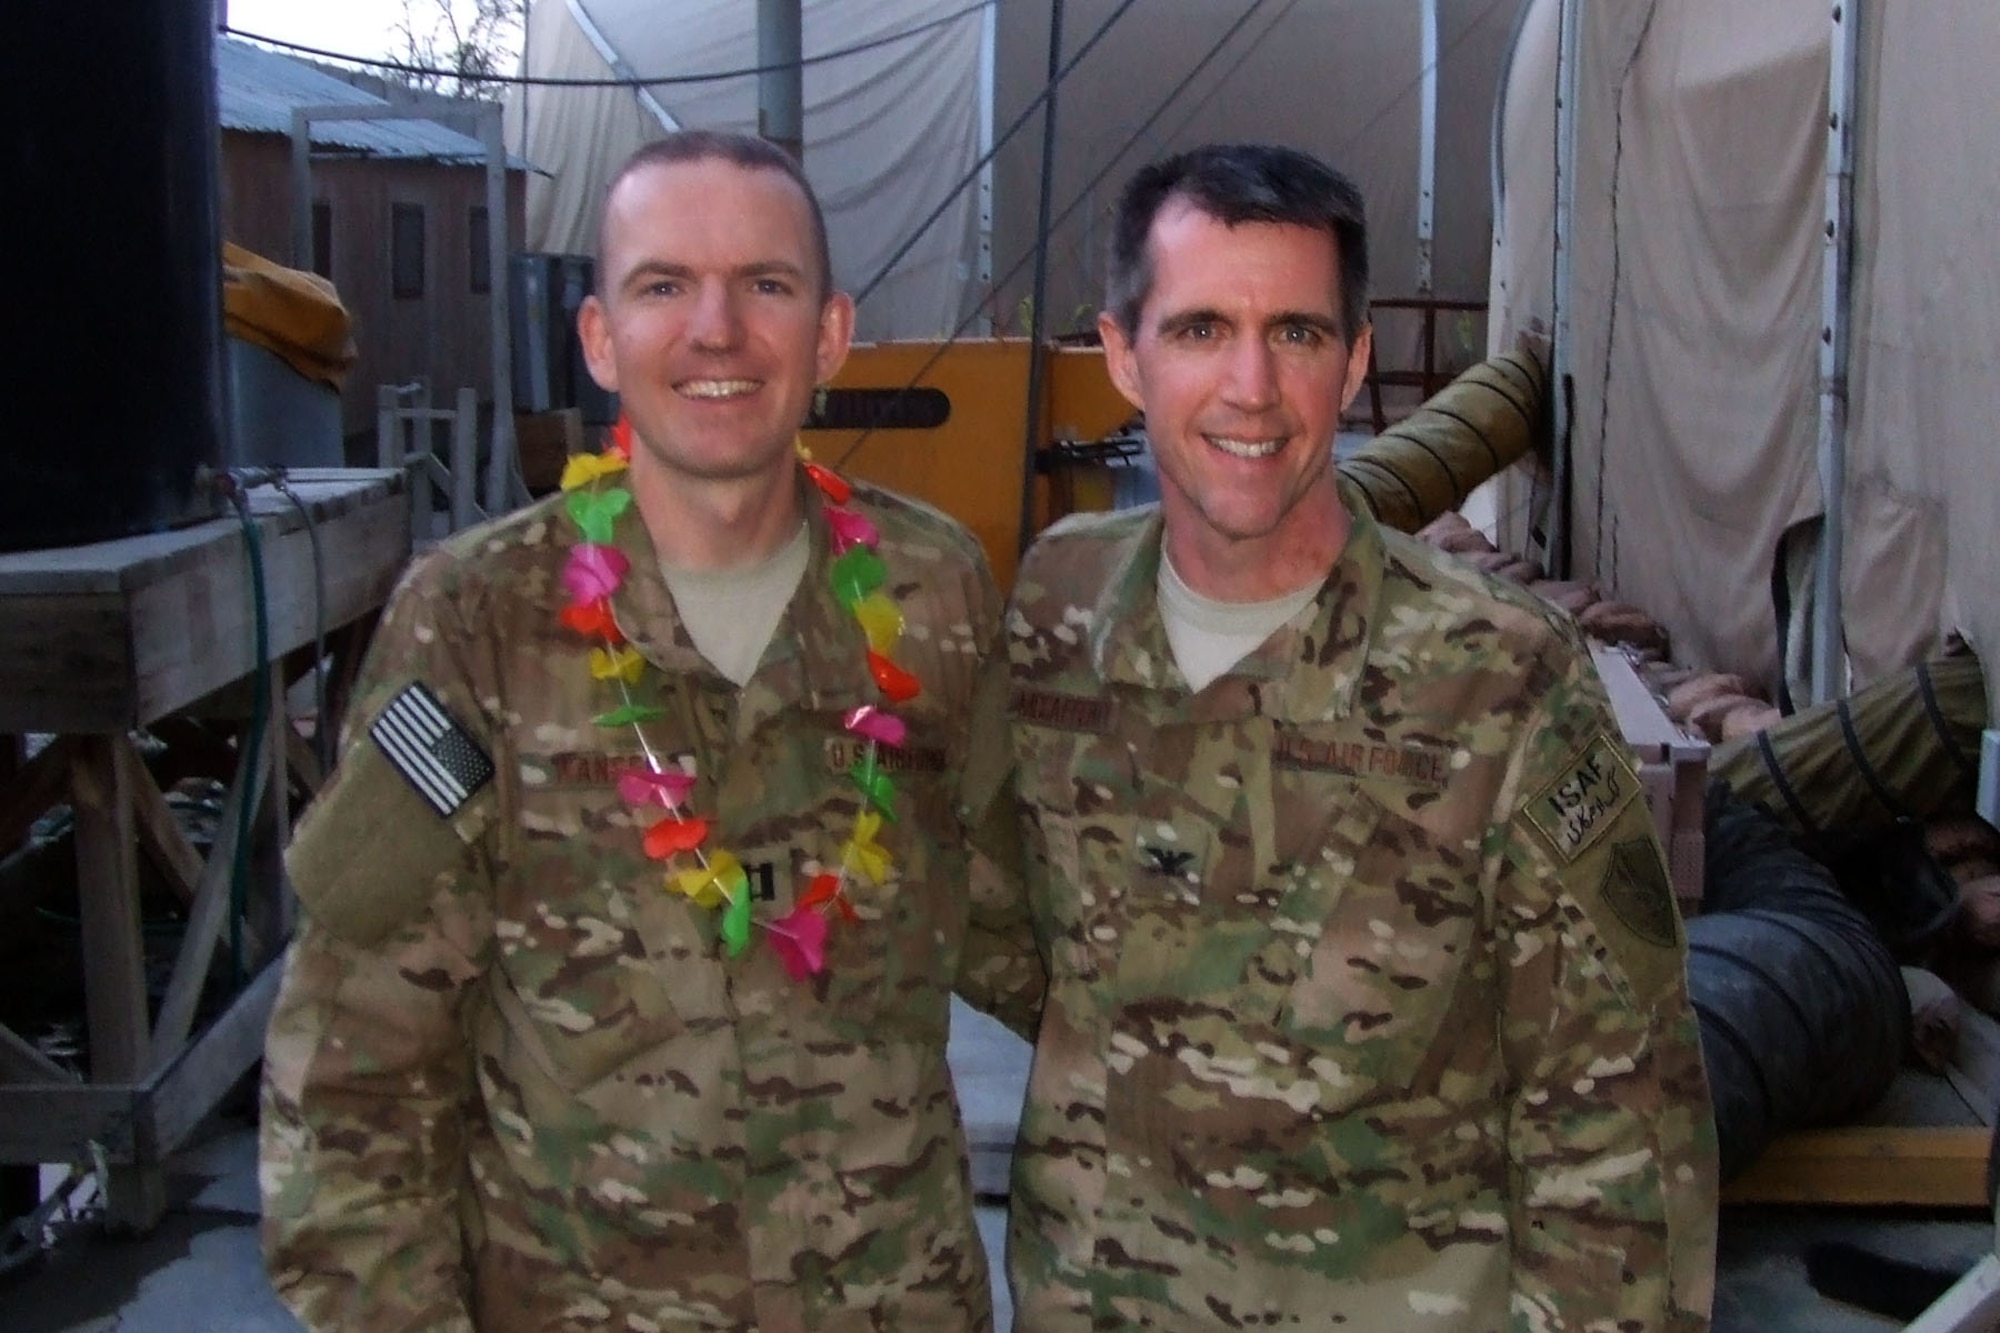 U.S. Air Force Col. Randall McCafferty and Capt. Joseph Hansen attend a luau at the Bagram Air Base Block party April 12, 2014.  The Air Forces Central Command Band entertained over 500 joint service members on the final day of their trip to Afghanistan. (U.S. Air Force Photo)